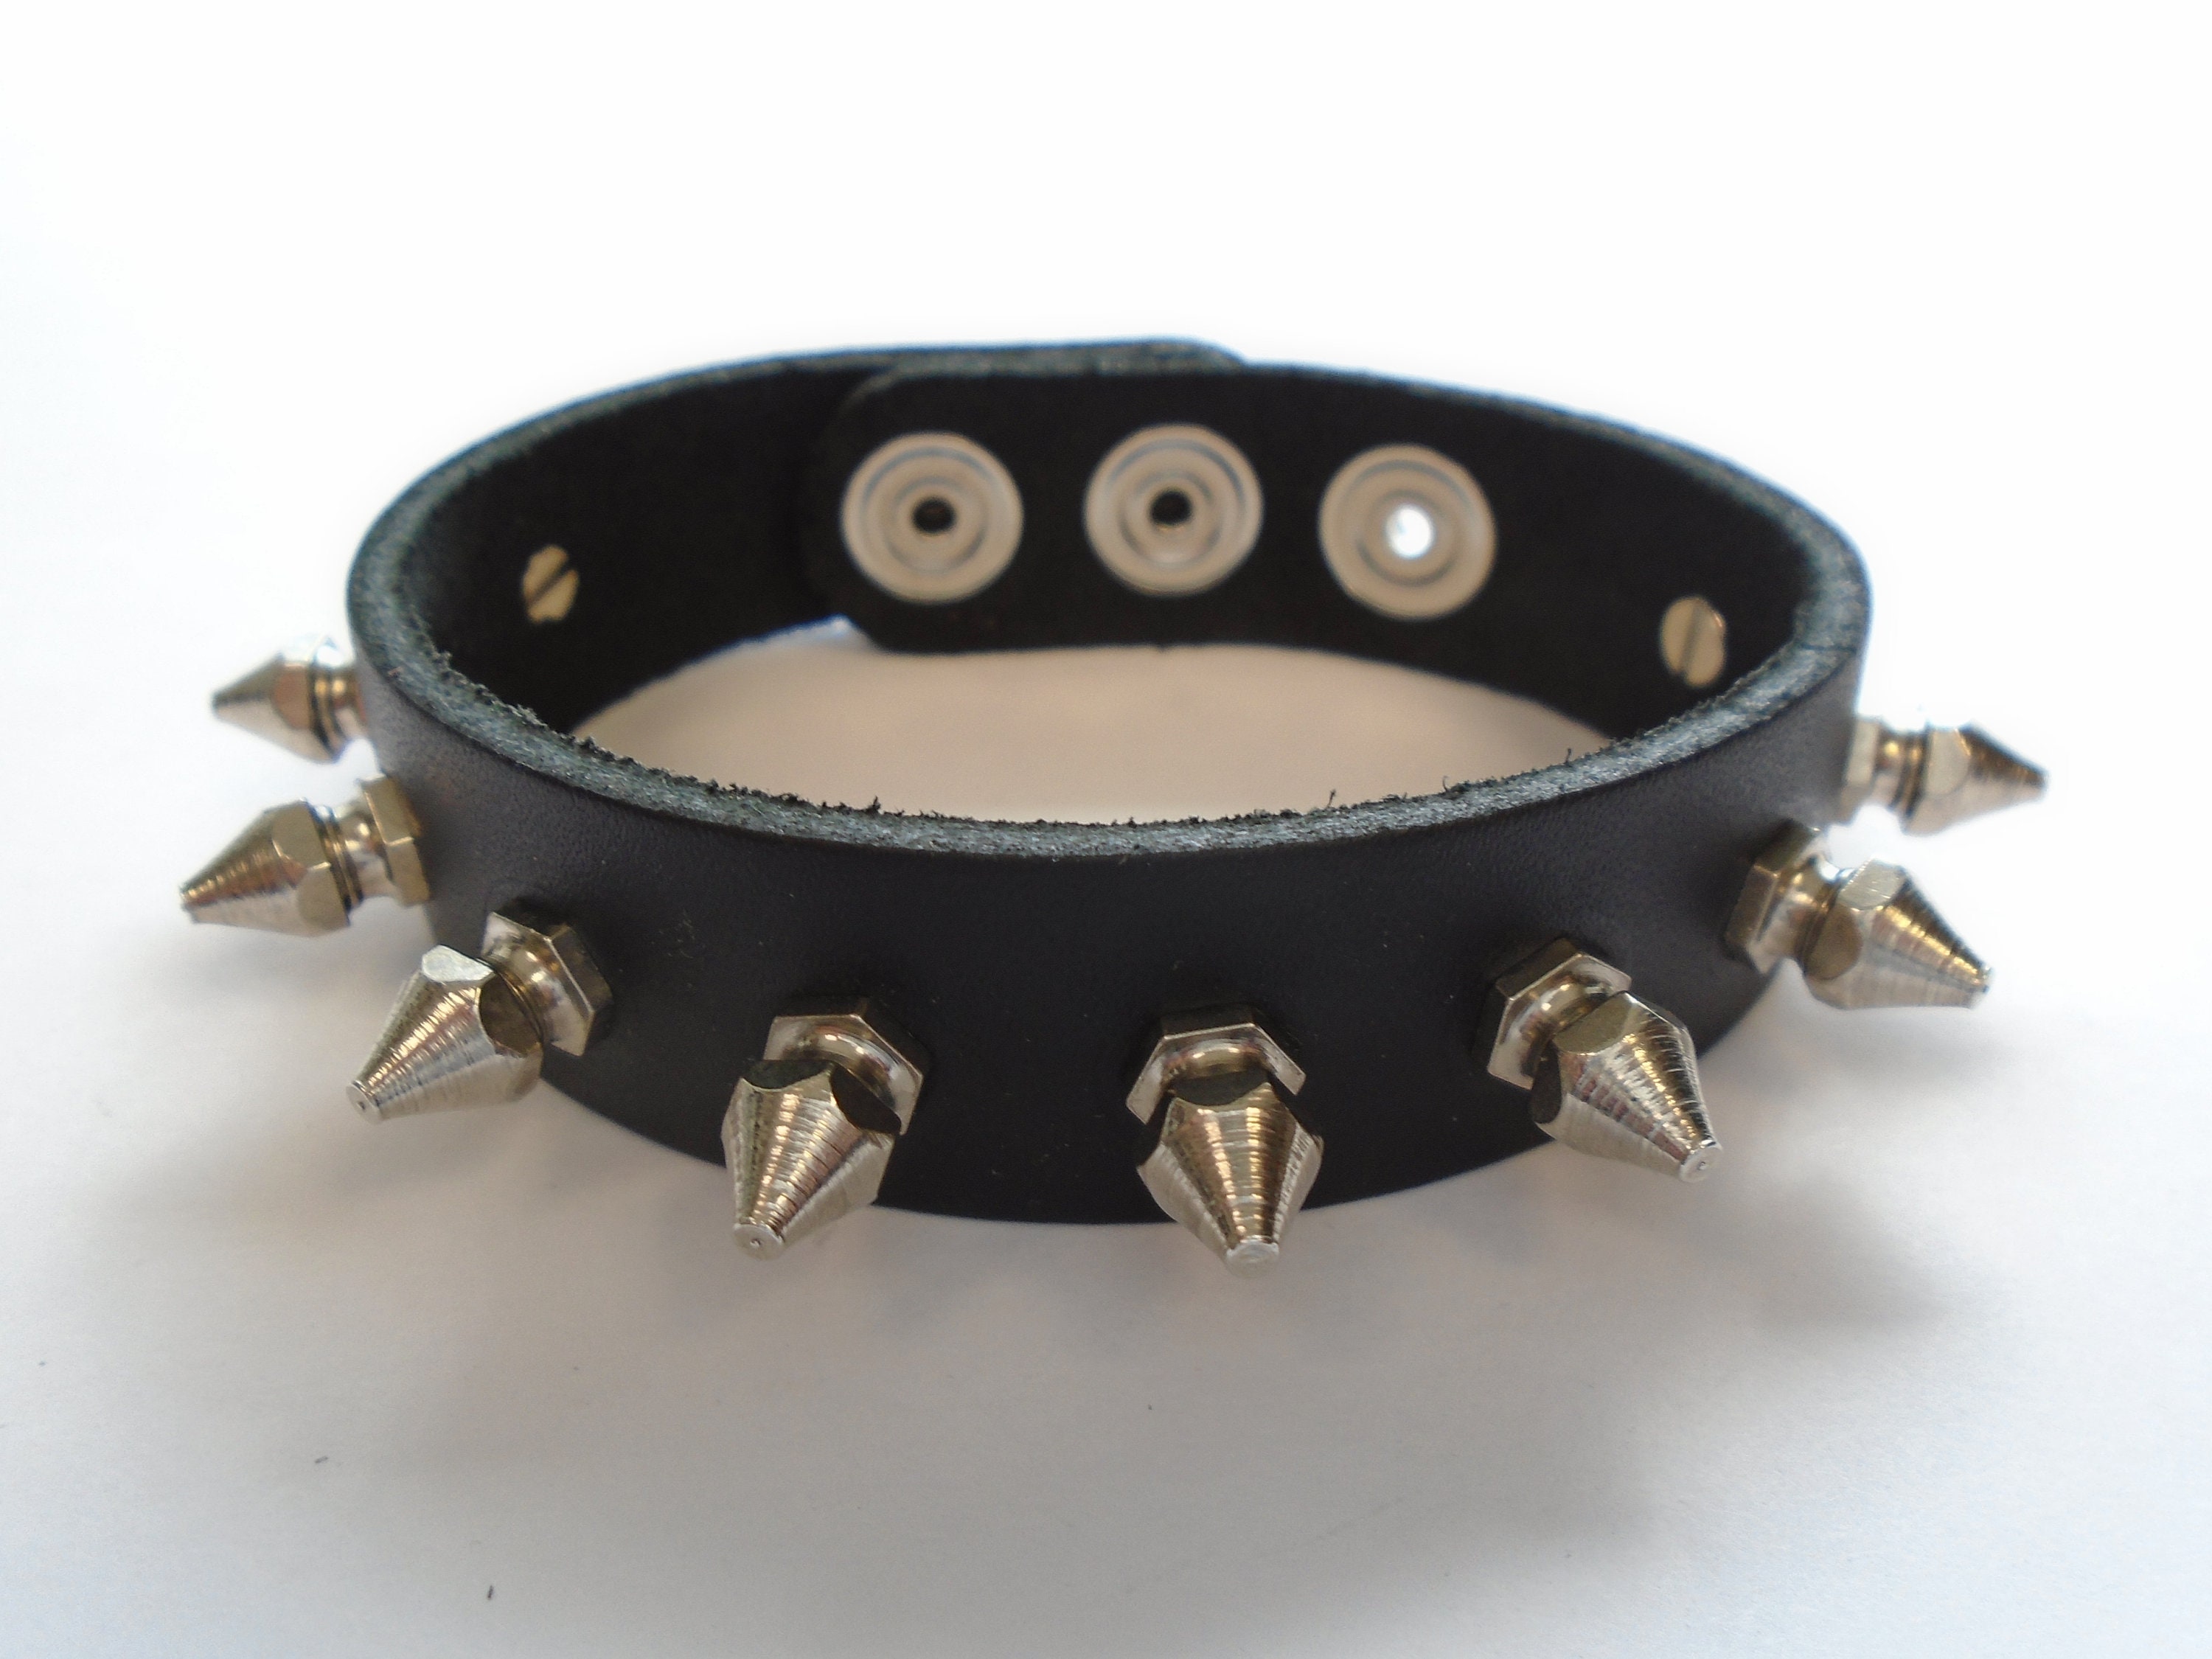 Premium Full Grain Leather Spiked Bracelet Wristband Hex Spikes Cuff Apex  Studs Band Punk Rock Glamour Hipster Handmade USA NYC -  Canada